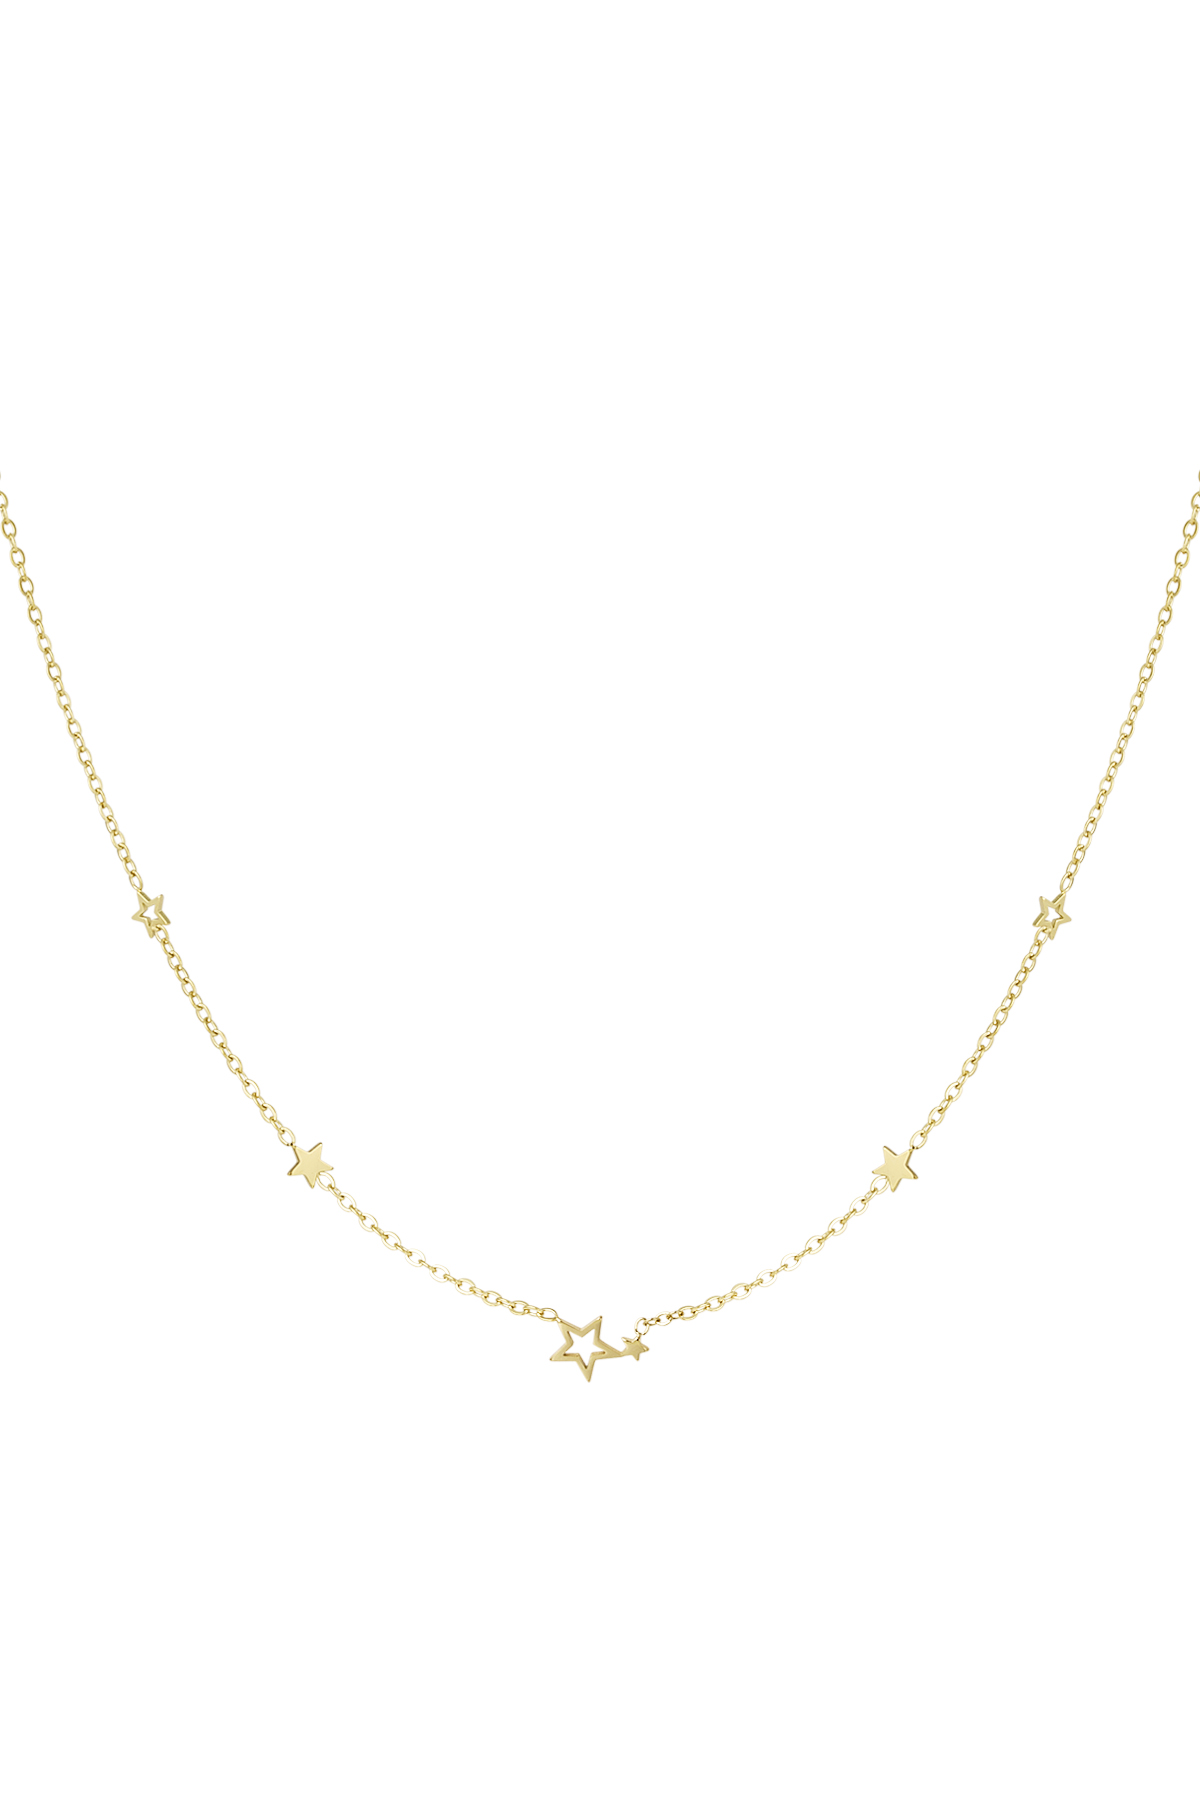 Necklace stainless steel stars - gold h5 